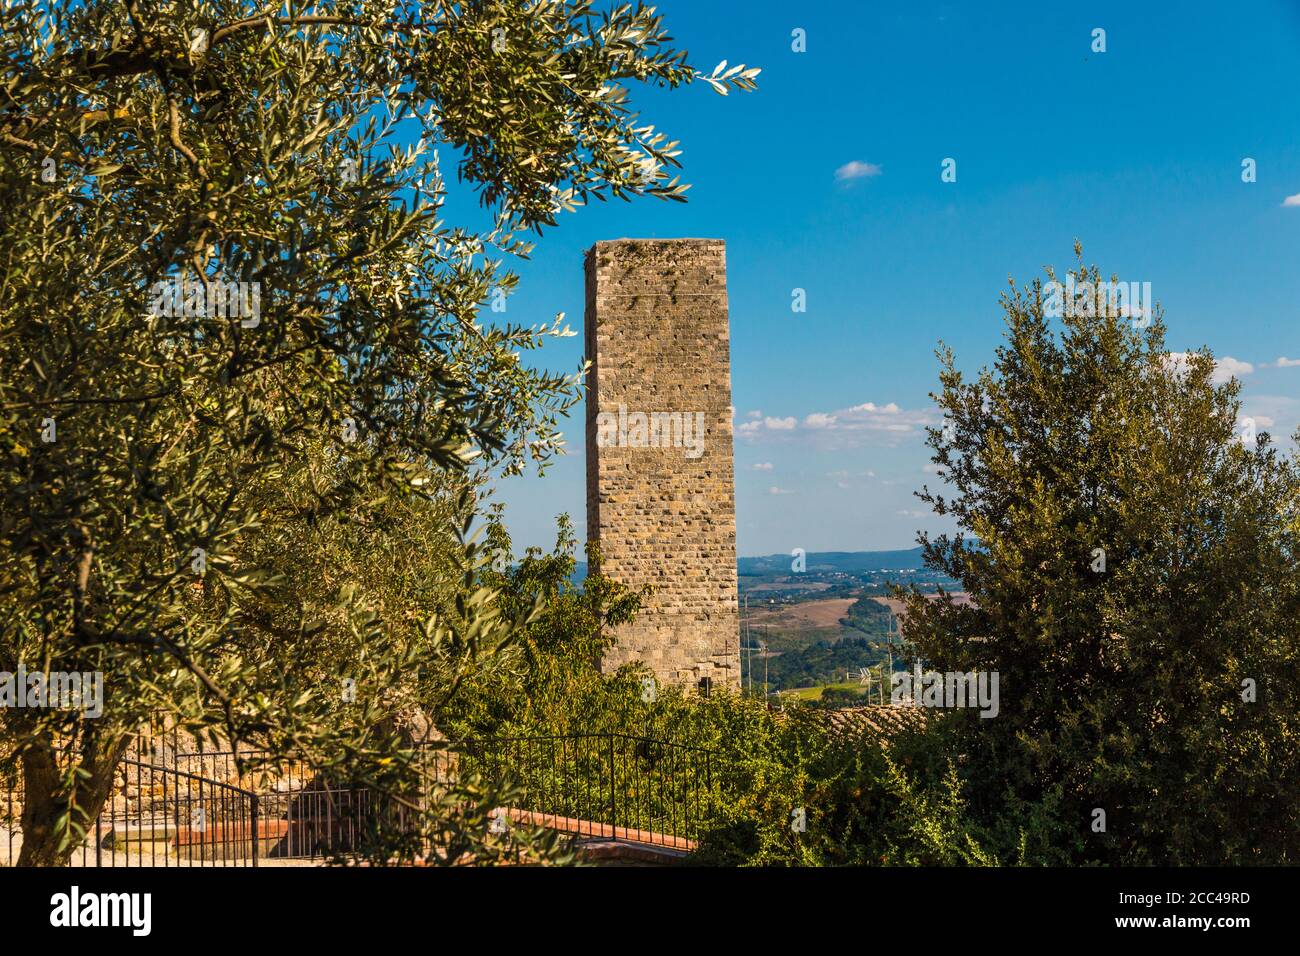 Gorgeous view of the Torre dei Cugnanesi next to an olive tree. The defensive tower is seen from the orchard-like public garden enclosed by La Rocca... Stock Photo